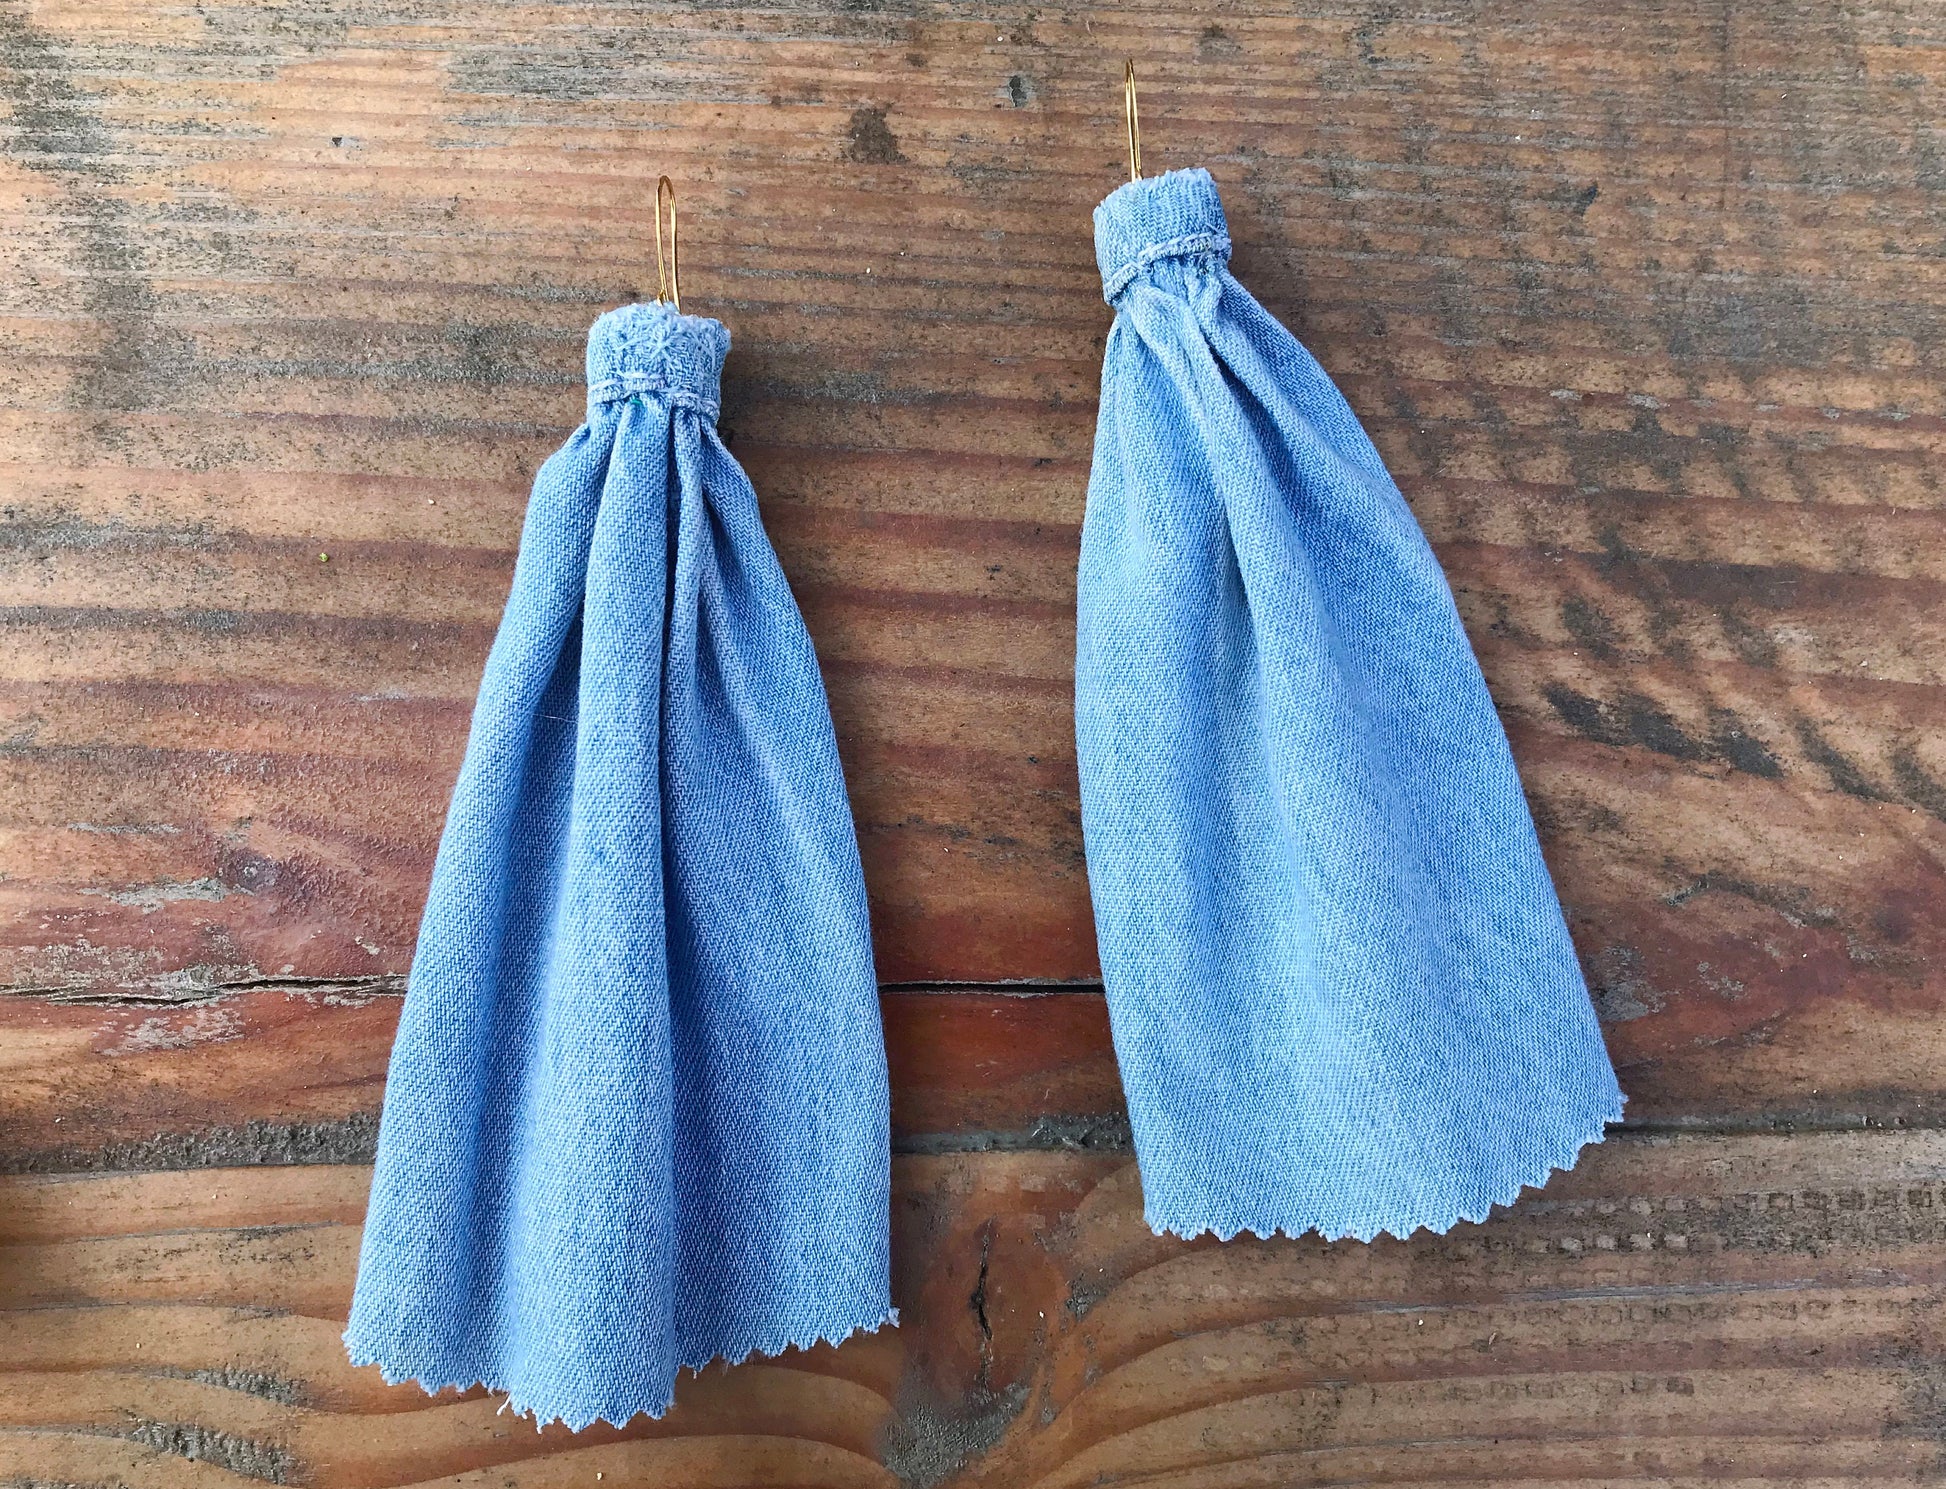 ReClaimed Denim Dangles - Hand-stitched